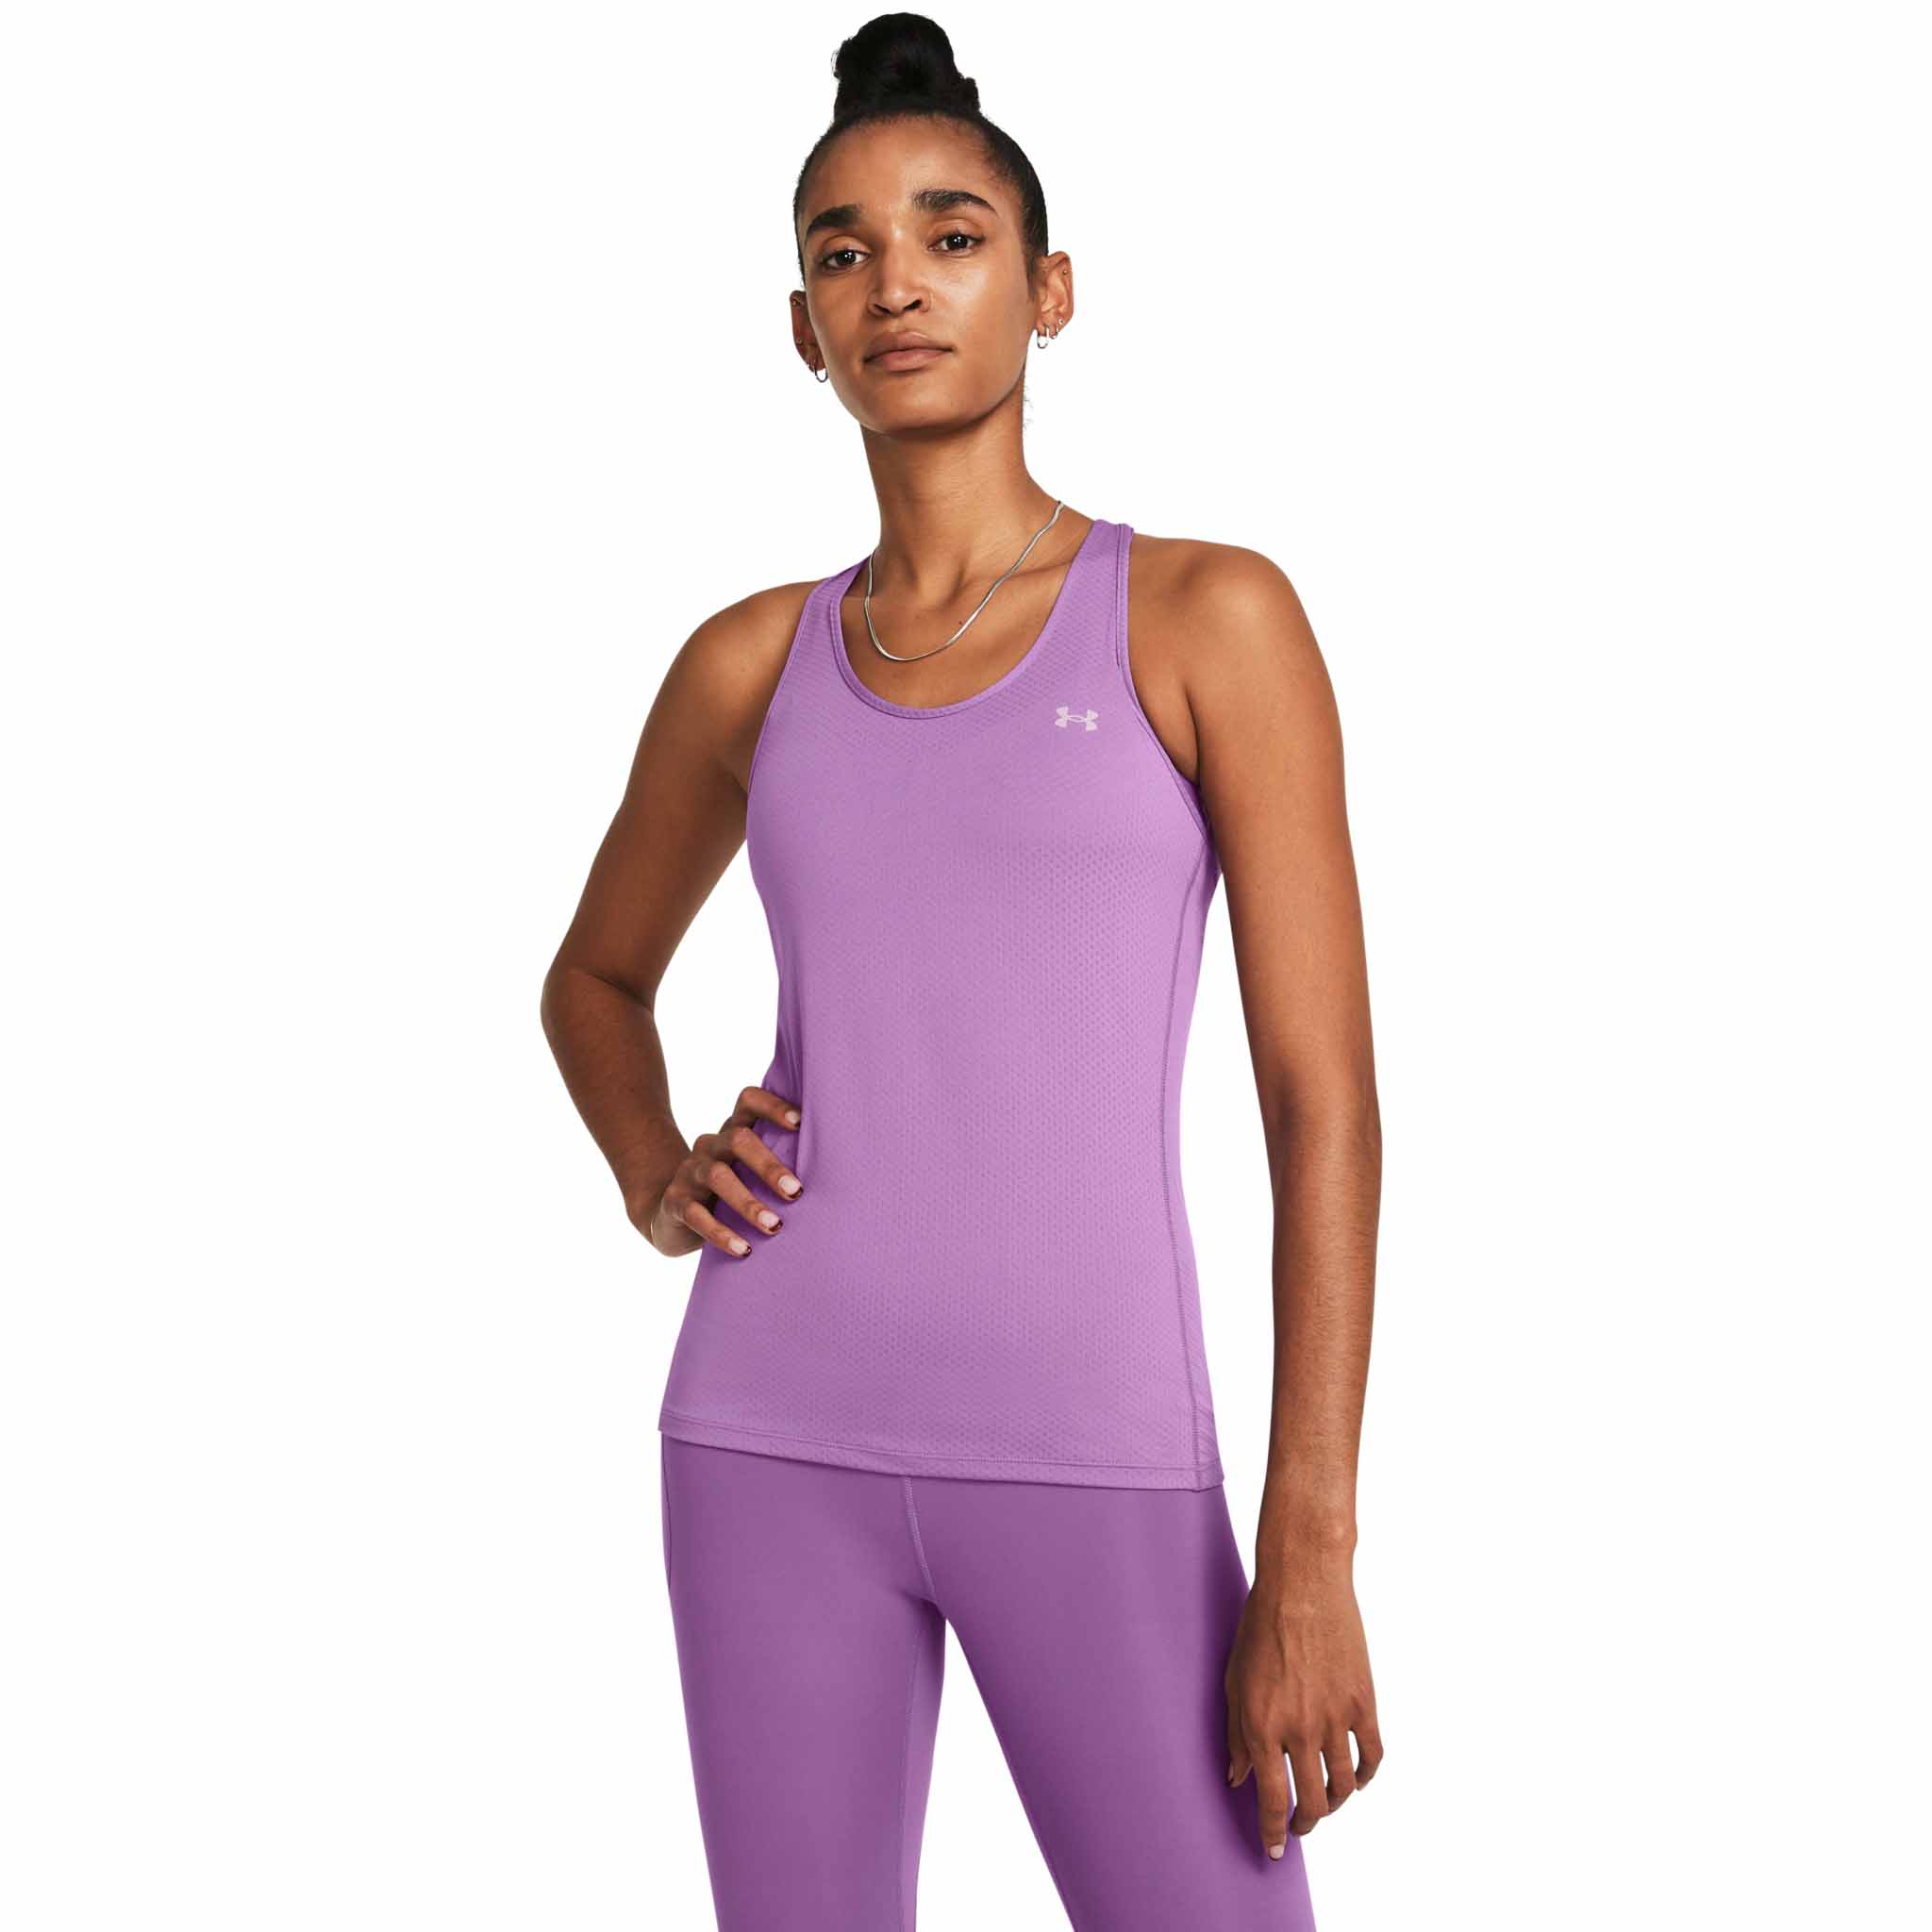  Under Armour Women's HeatGear Armour Racer Tank, (014) Halo  Gray / / White, X-Small : Clothing, Shoes & Jewelry